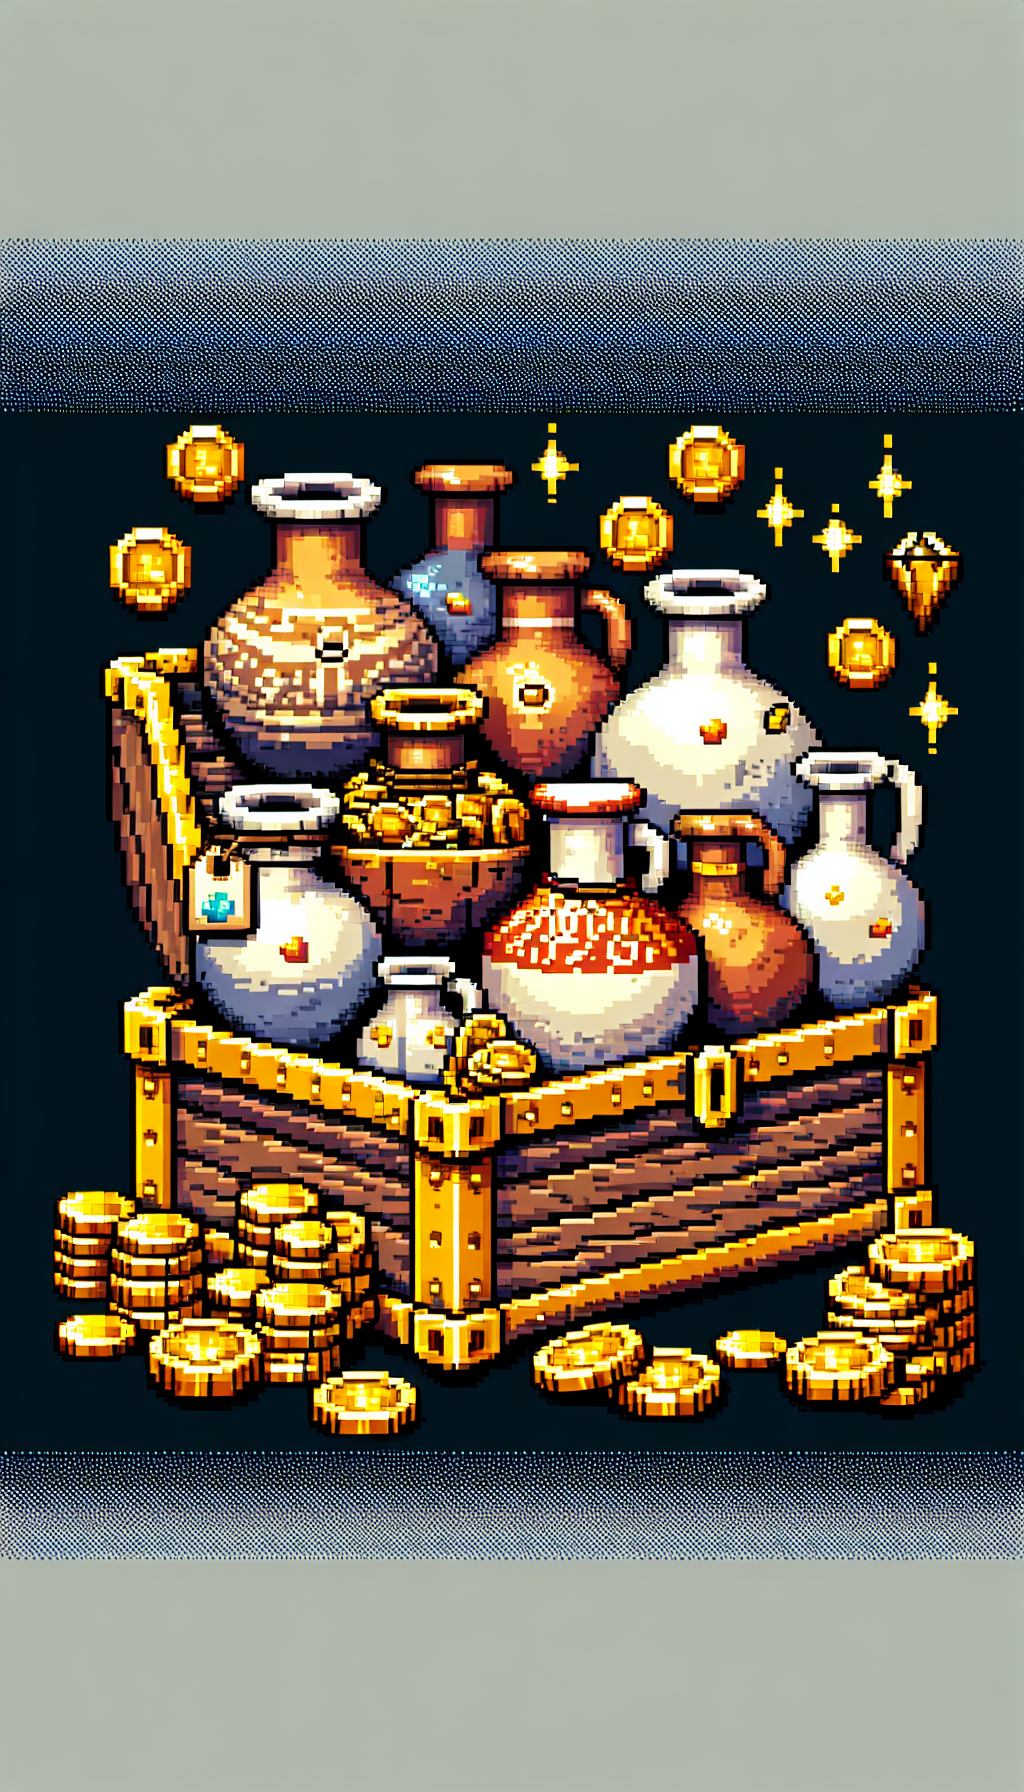 A pixel-art treasure chest overflows with an assortment of vintage crocks and jugs, among sparkles of gold coins and gems. The juxtaposition of the simple, rustic pottery with the opulence of treasure conveys the hidden value of antiques. A pixelated price tag dangles from a particularly grand jug, emphasizing the potential monetary gain from these items.